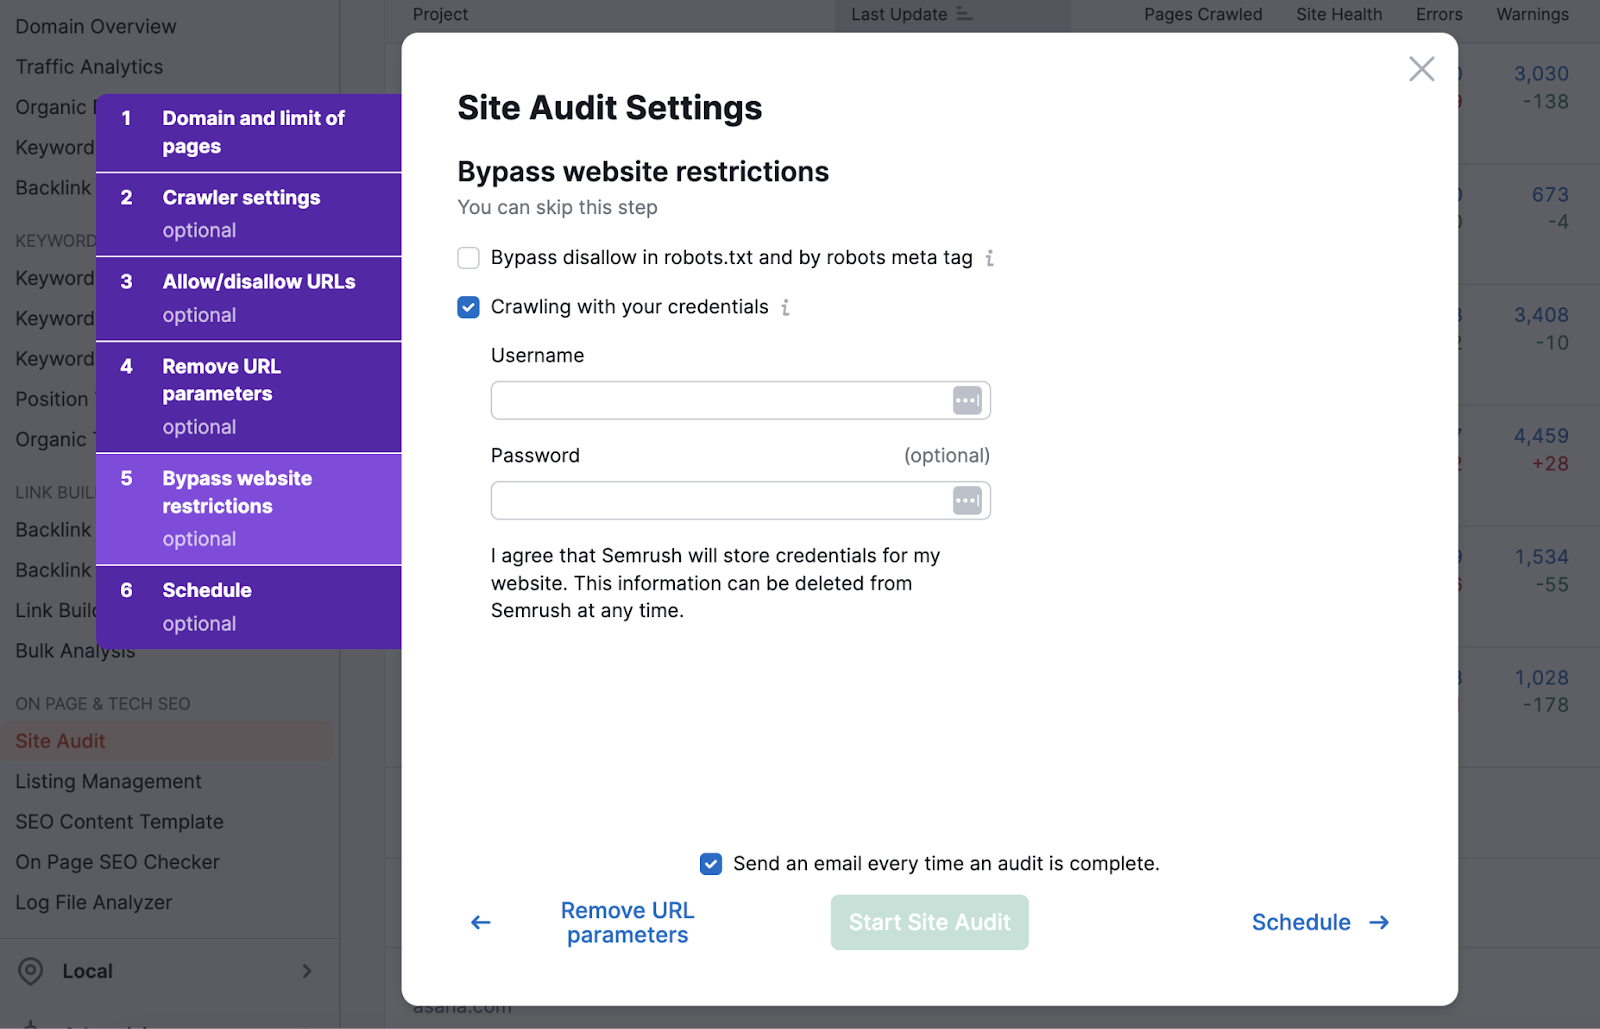 "Bypass website restrictions" section under "Site Audit Settings" window